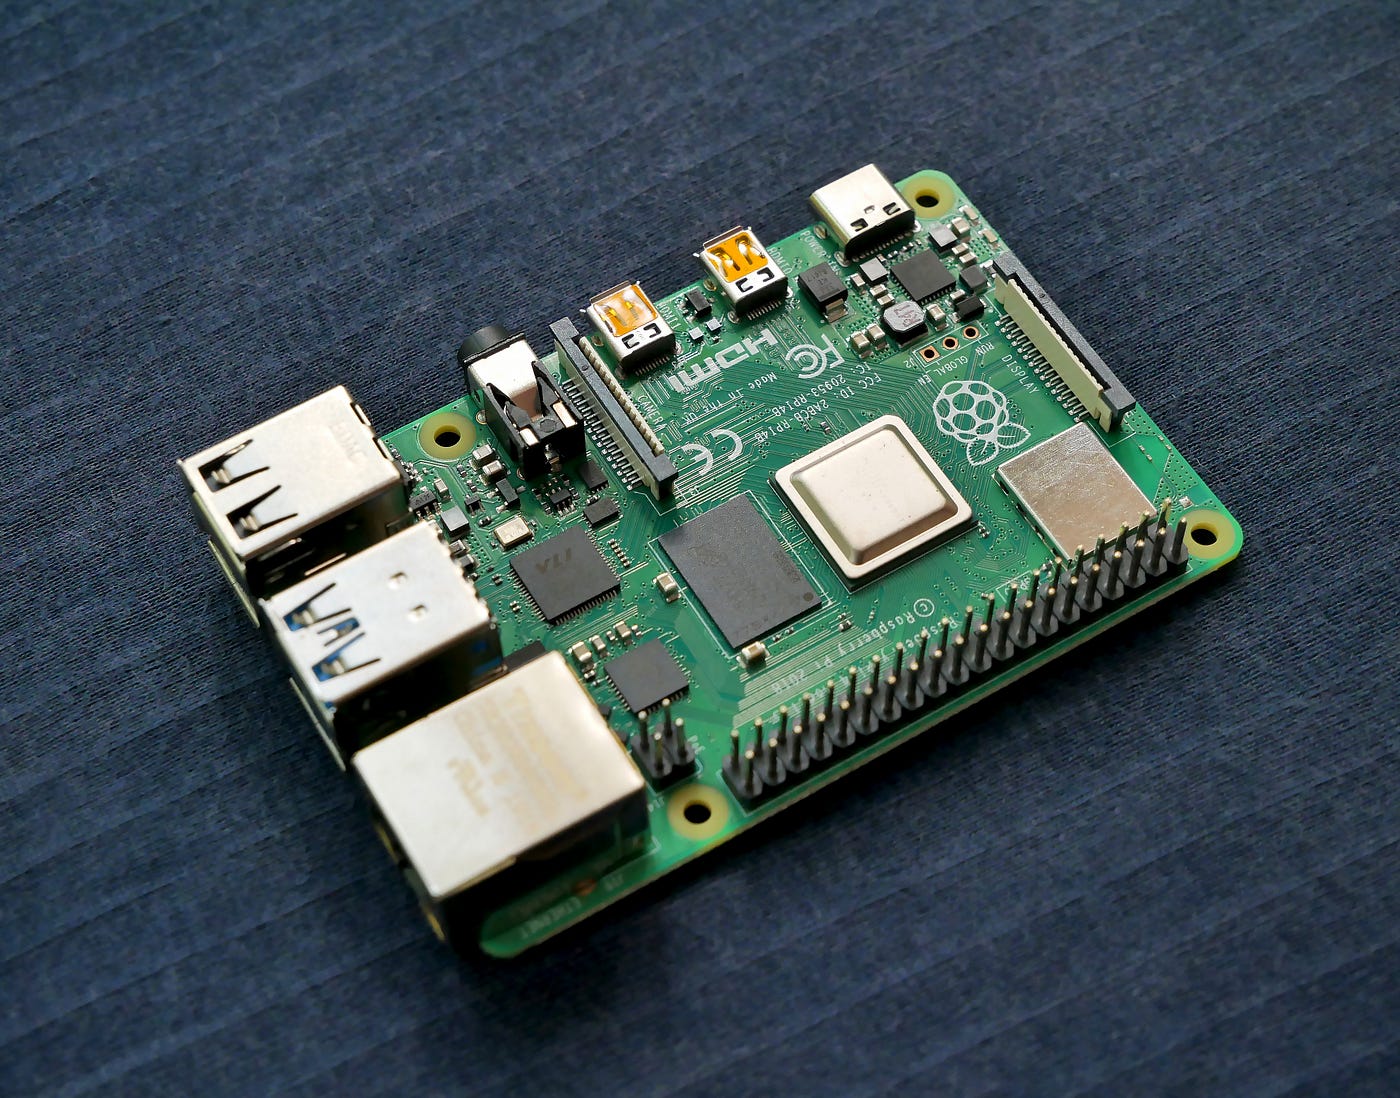 How to Connect to Raspberry Pi using USB Hot-spot